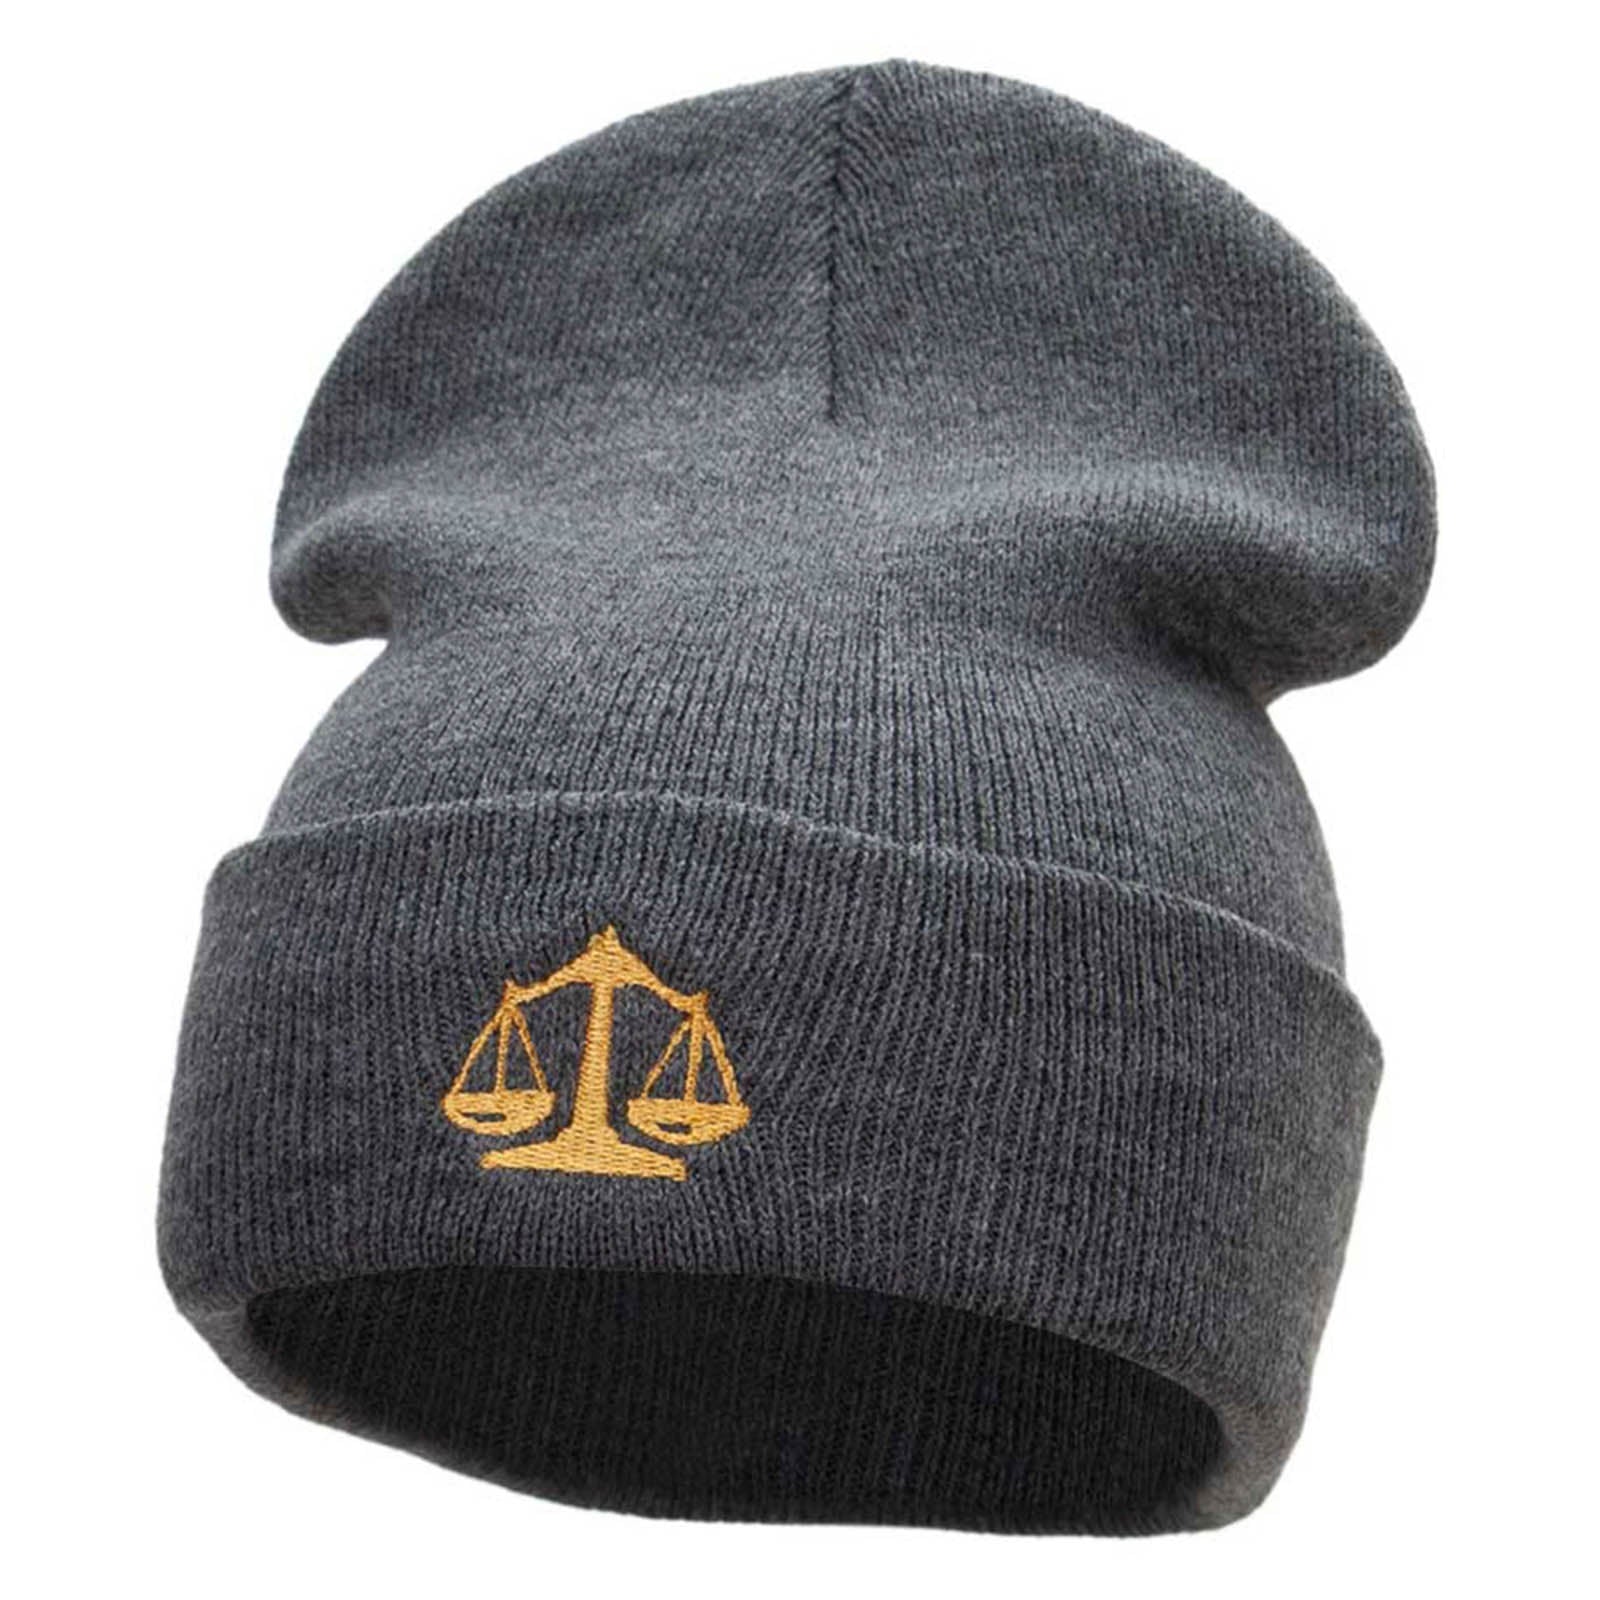 Scales Of Justice Embroidered 12 Inch Long Knitted Beanie - Dk Grey OSFM